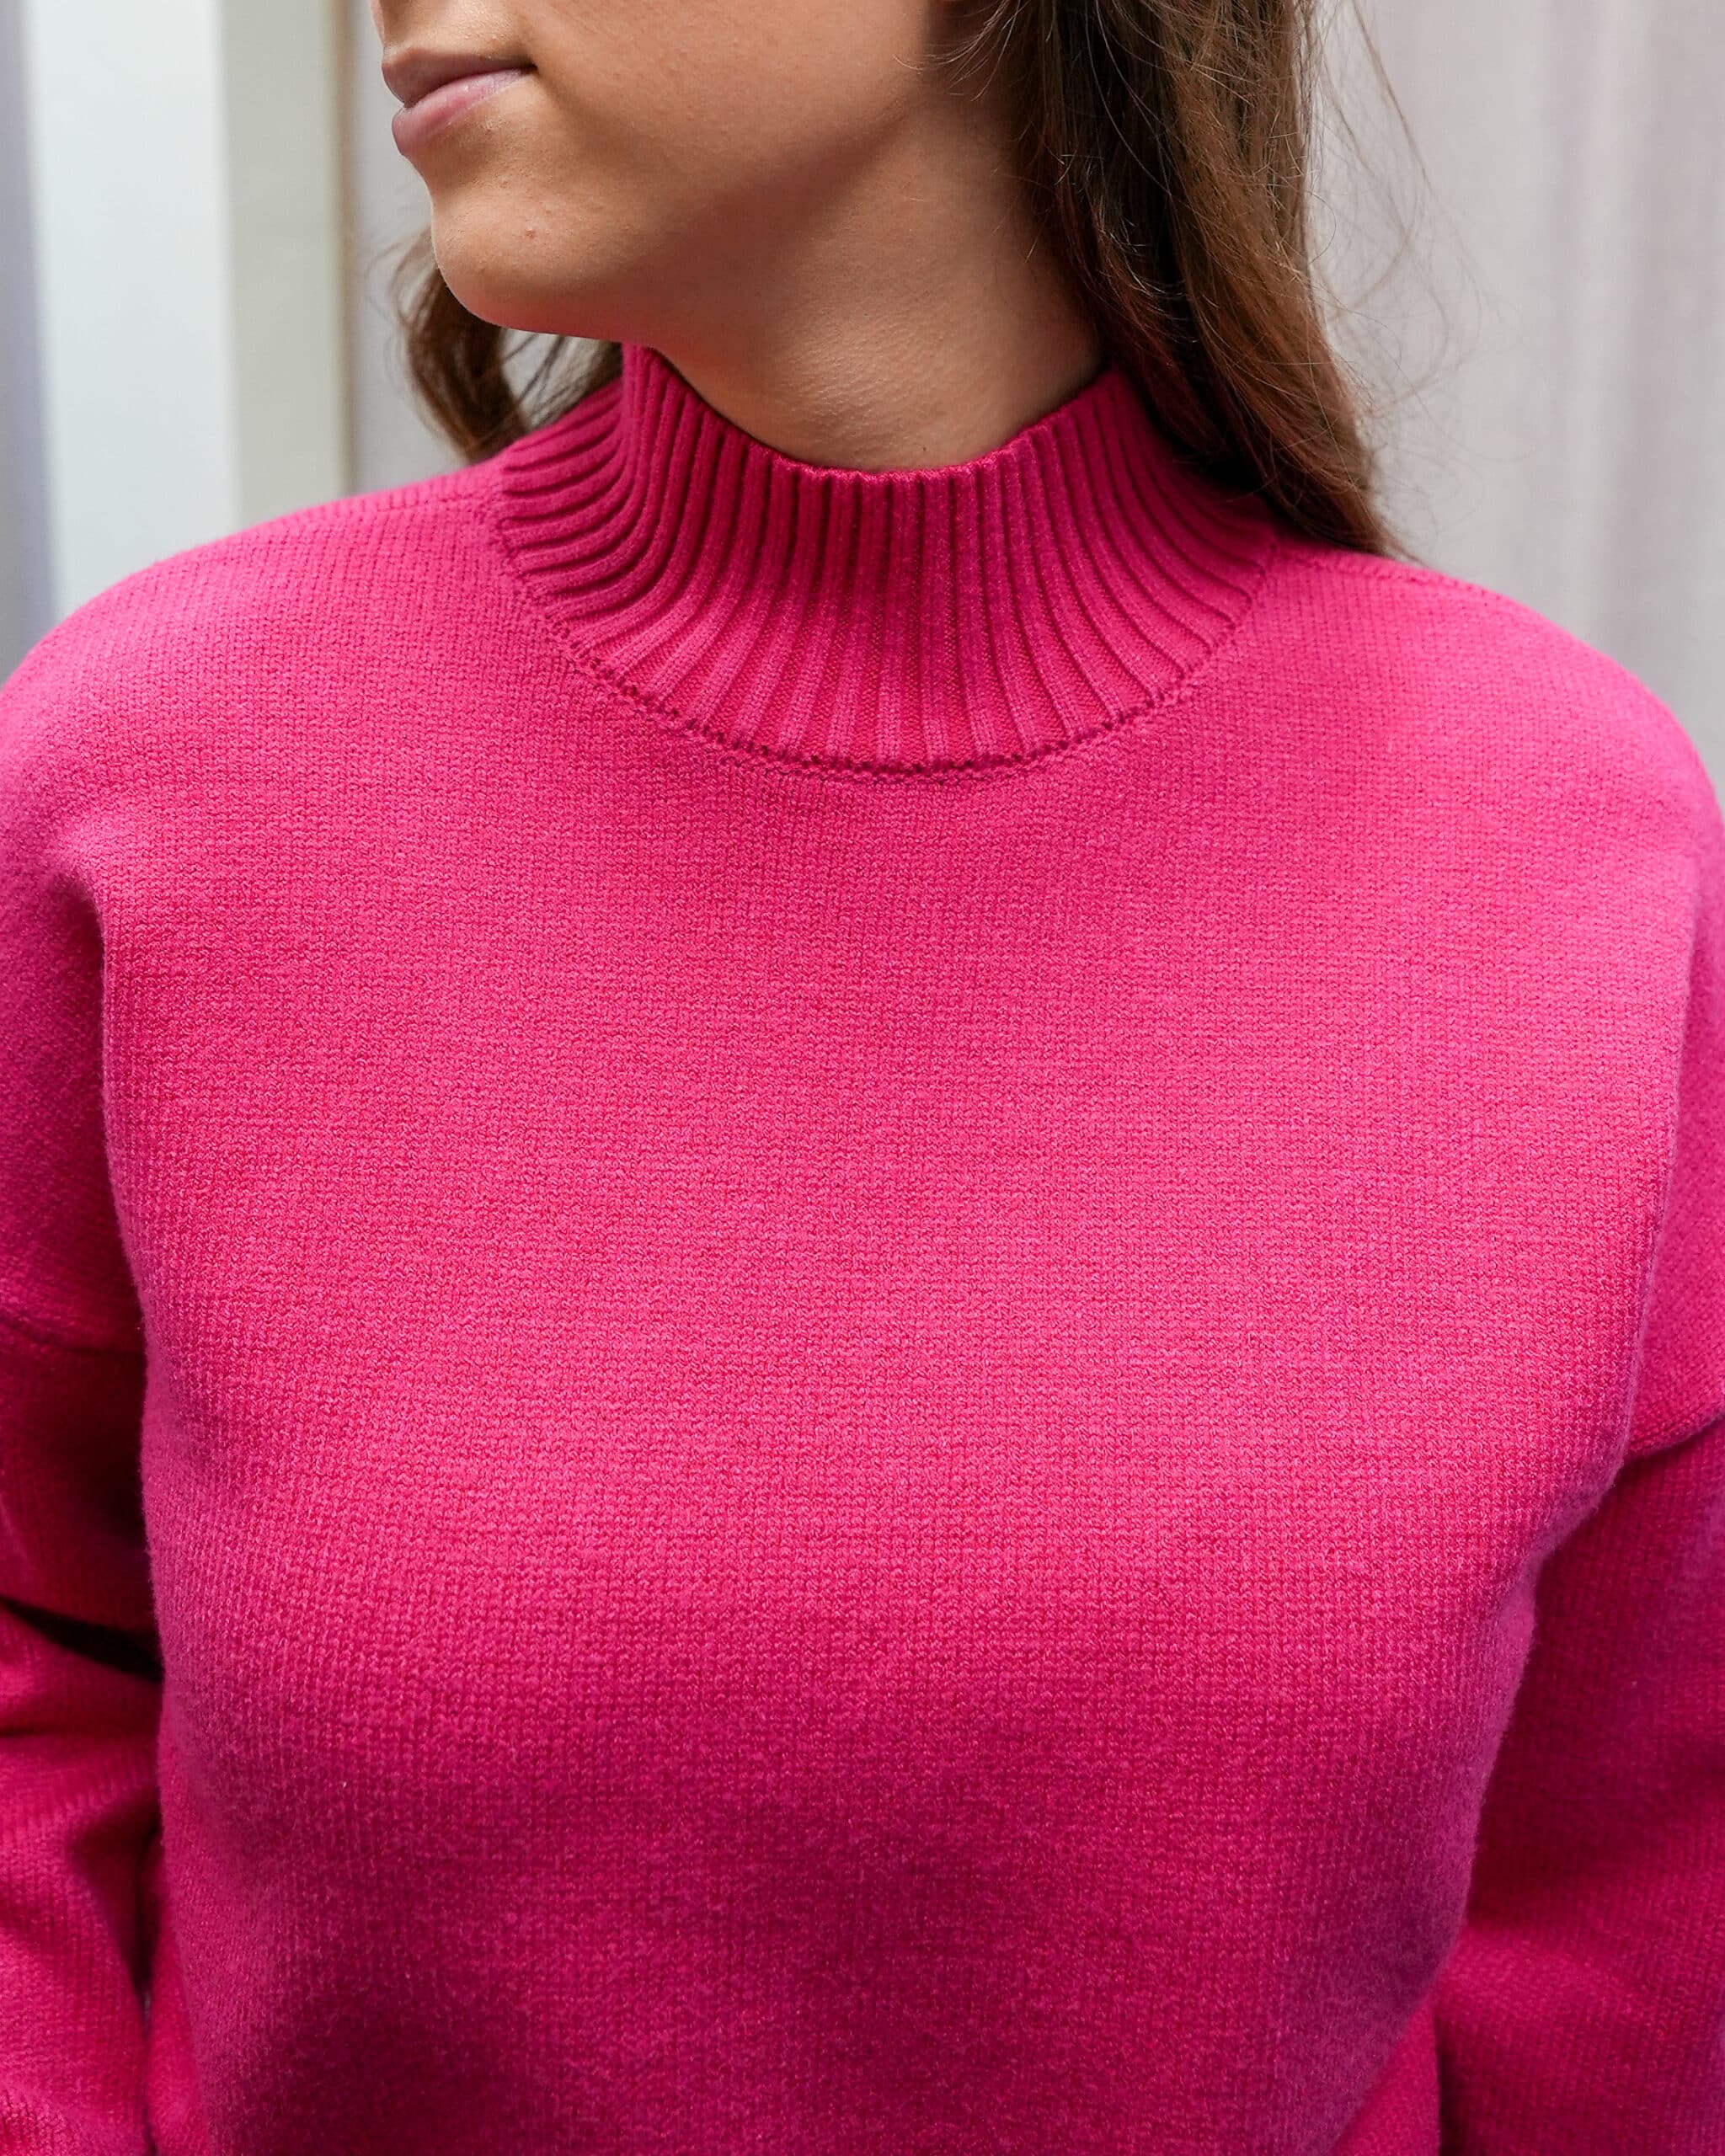 Pink and Red Colorblock Sweater